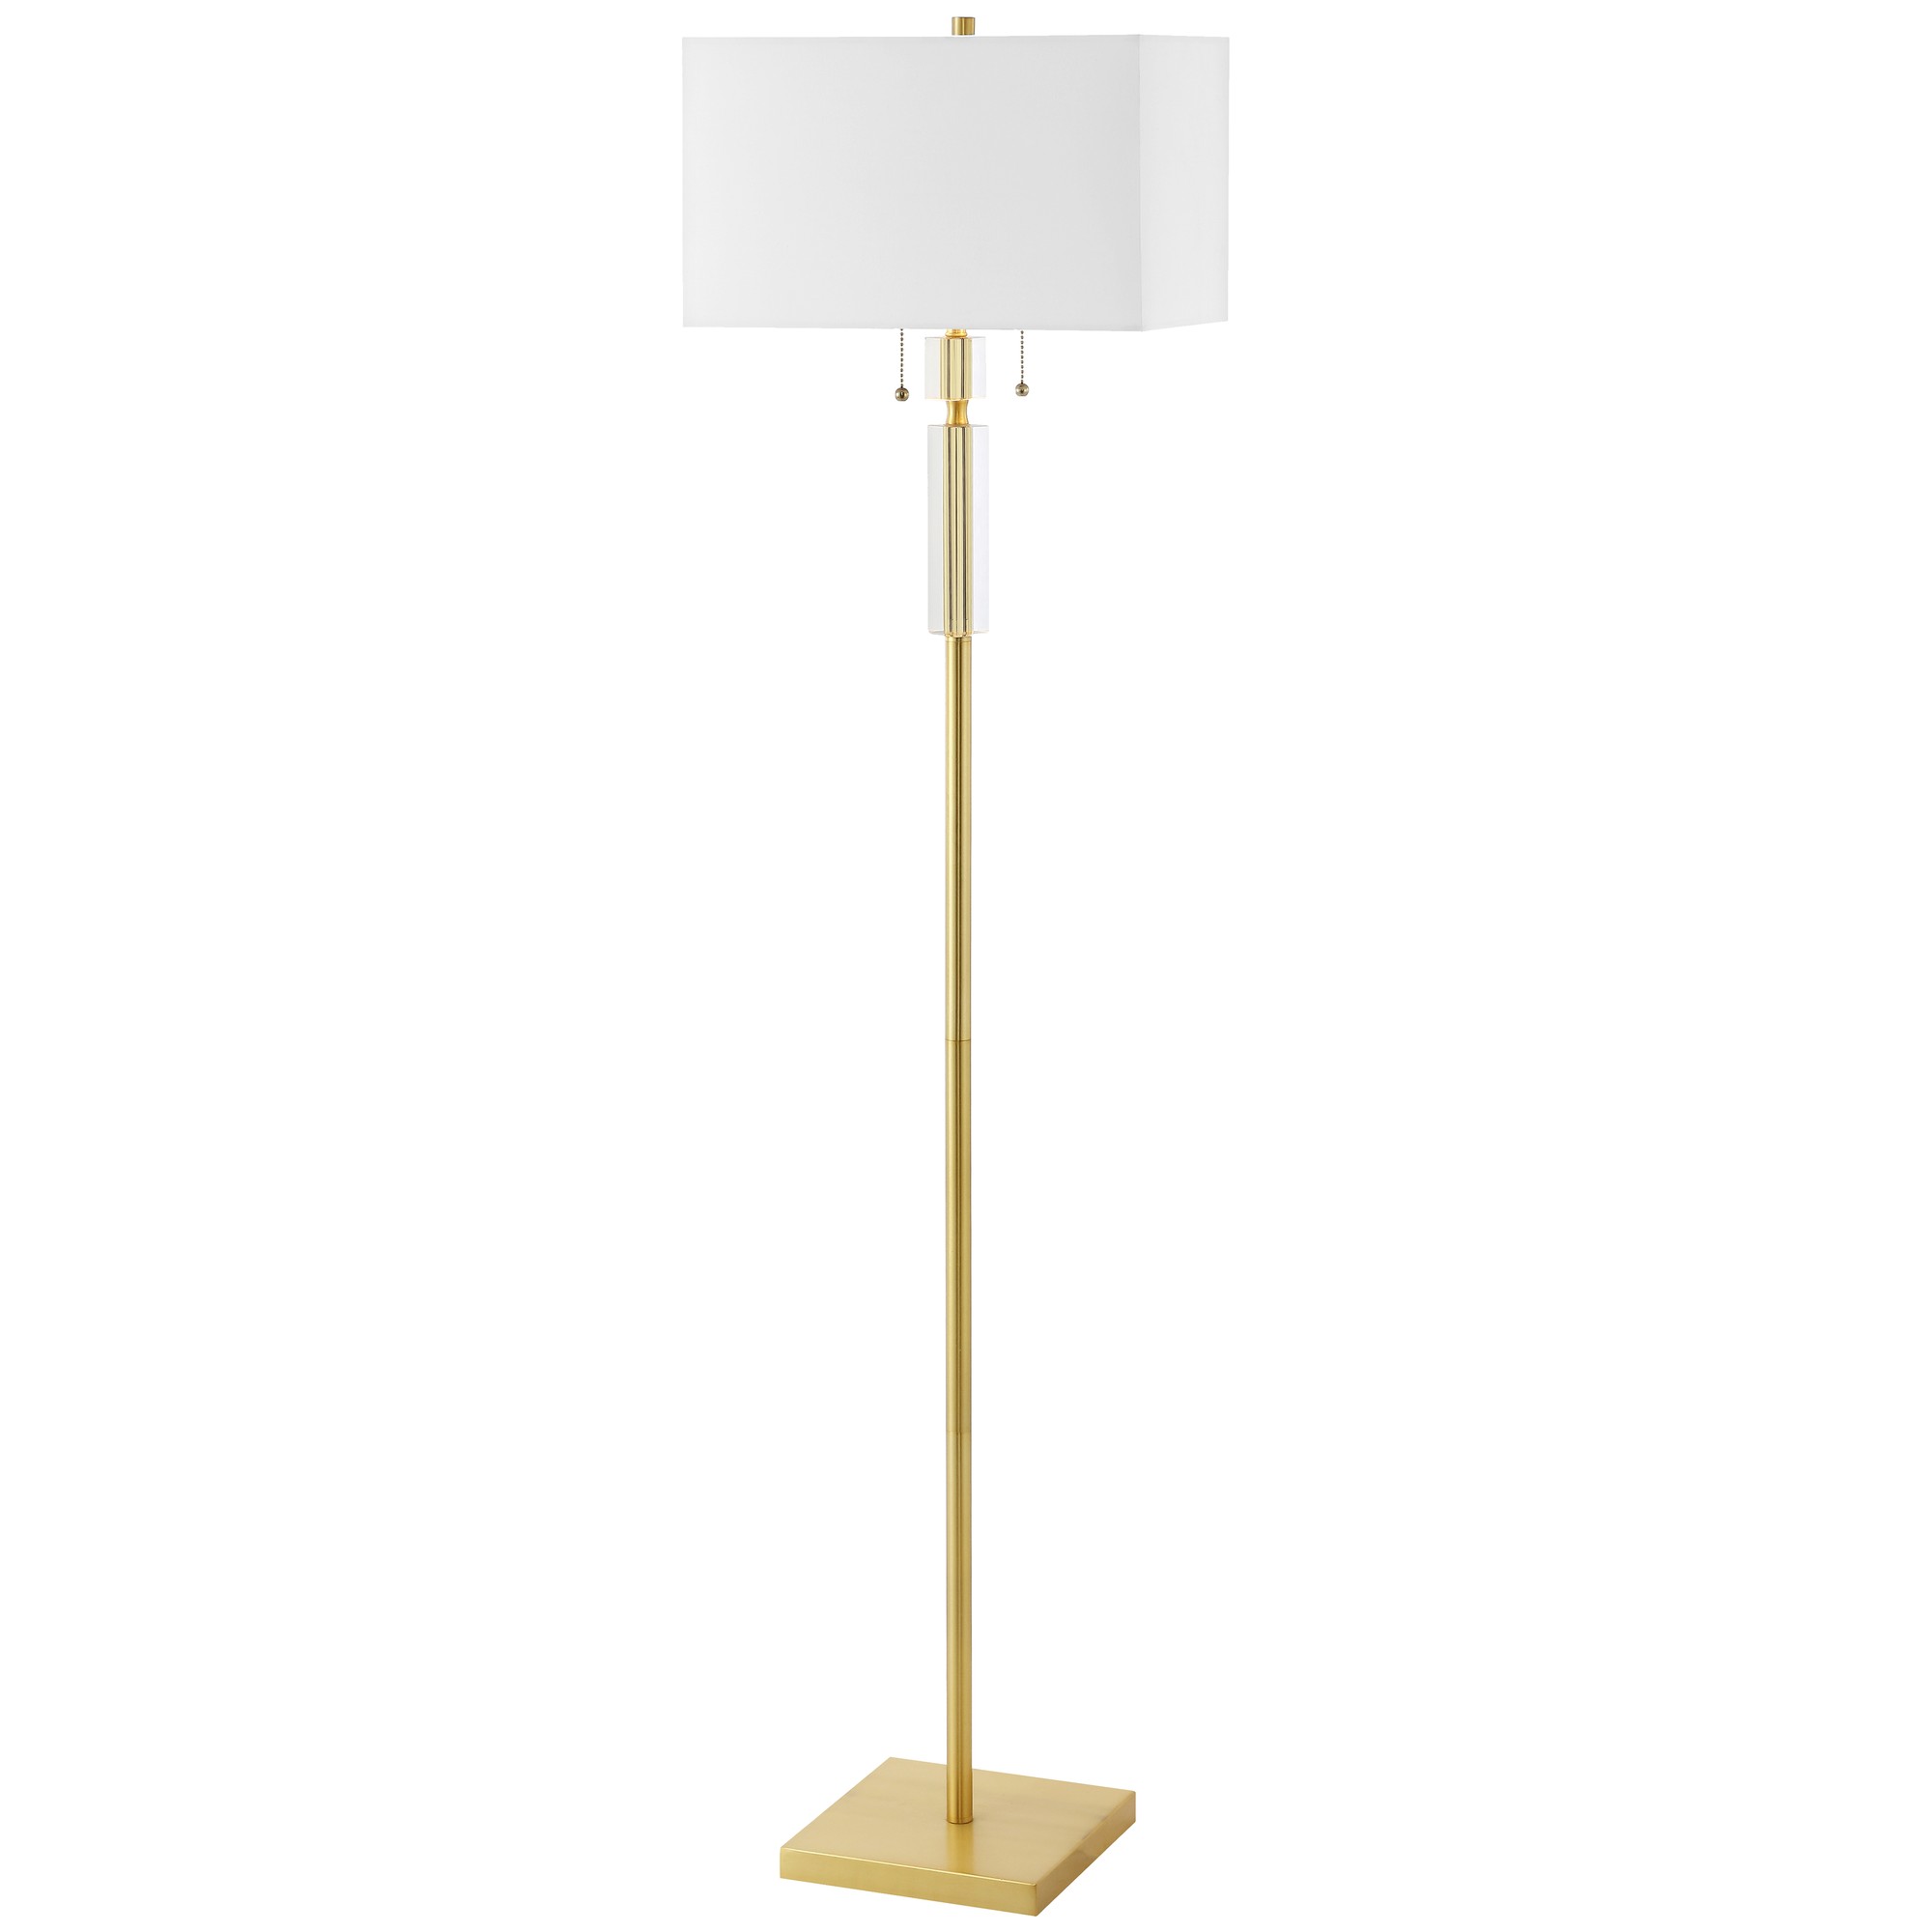 2 Light Incandescent Floor Lamp Aged Brass with White Shade